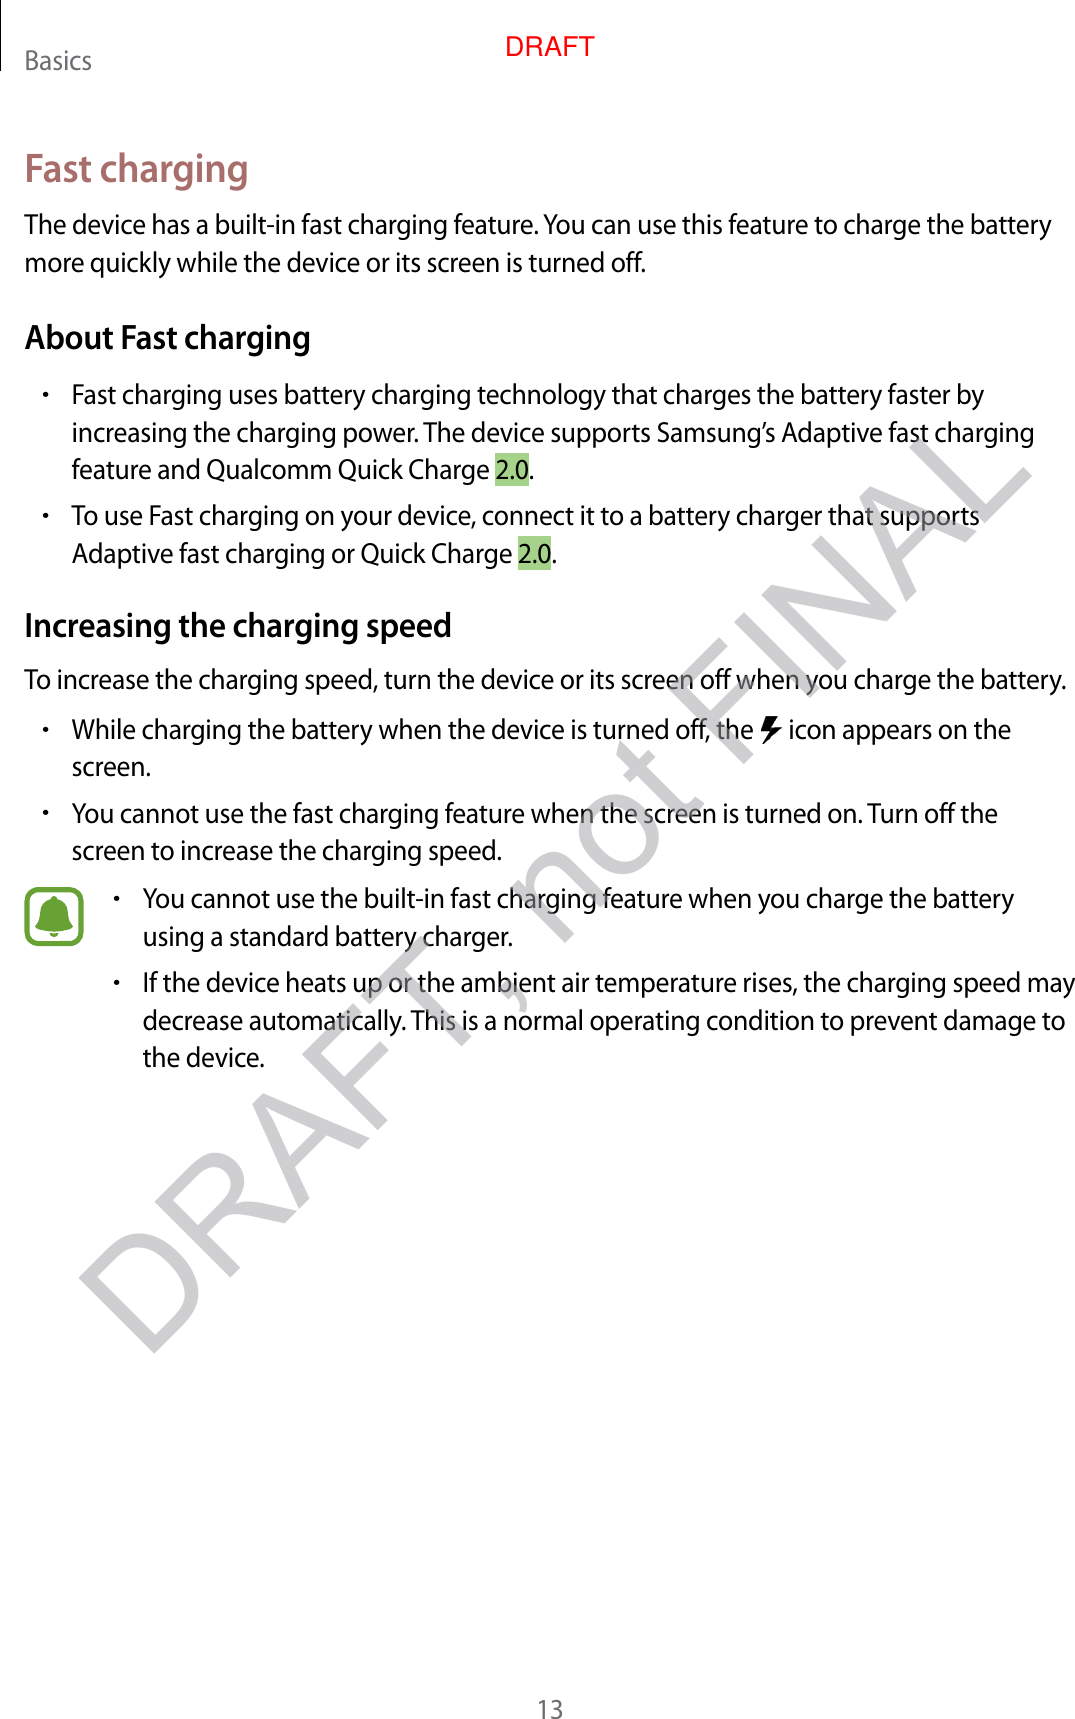 Basics13Fast chargingThe device has a built-in fast charging feature. You can use this feature to charge the battery more quickly while the device or its screen is turned off.About Fast charging•Fast charging uses battery charging technology that charges the battery faster by increasing the charging power. The device supports Samsung’s Adaptive fast charging feature and Qualcomm Quick Charge 2.0.•To use Fast charging on your device, connect it to a battery charger that supports Adaptive fast charging or Quick Charge 2.0.Increasing the charging speedTo increase the charging speed, turn the device or its screen off when you charge the battery.•While charging the battery when the device is turned off, the   icon appears on the screen.•You cannot use the fast charging feature when the screen is turned on. Turn off the screen to increase the charging speed.•You cannot use the built-in fast charging feature when you charge the battery using a standard battery charger.•If the device heats up or the ambient air temperature rises, the charging speed may decrease automatically. This is a normal operating condition to prevent damage to the device.DRAFT, not FINALDRAFT